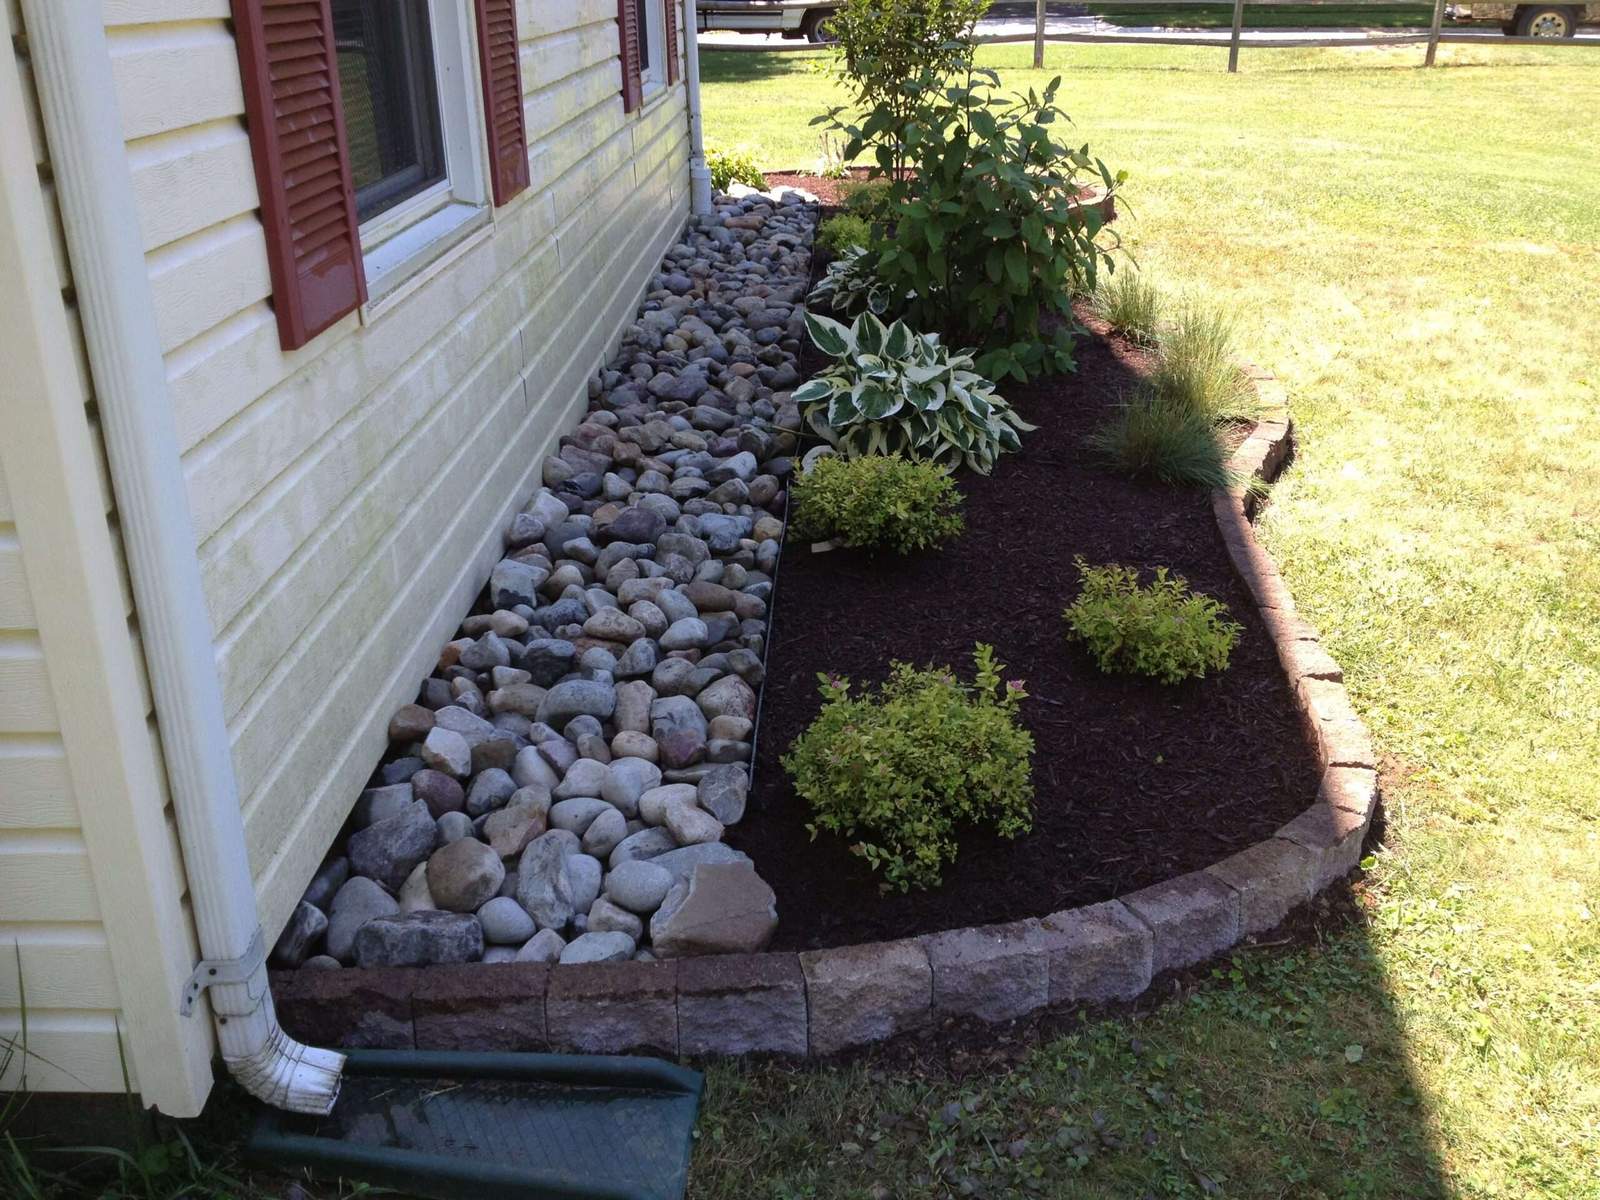 Bugs can be a problem when mulch is too close to the house. Adding…